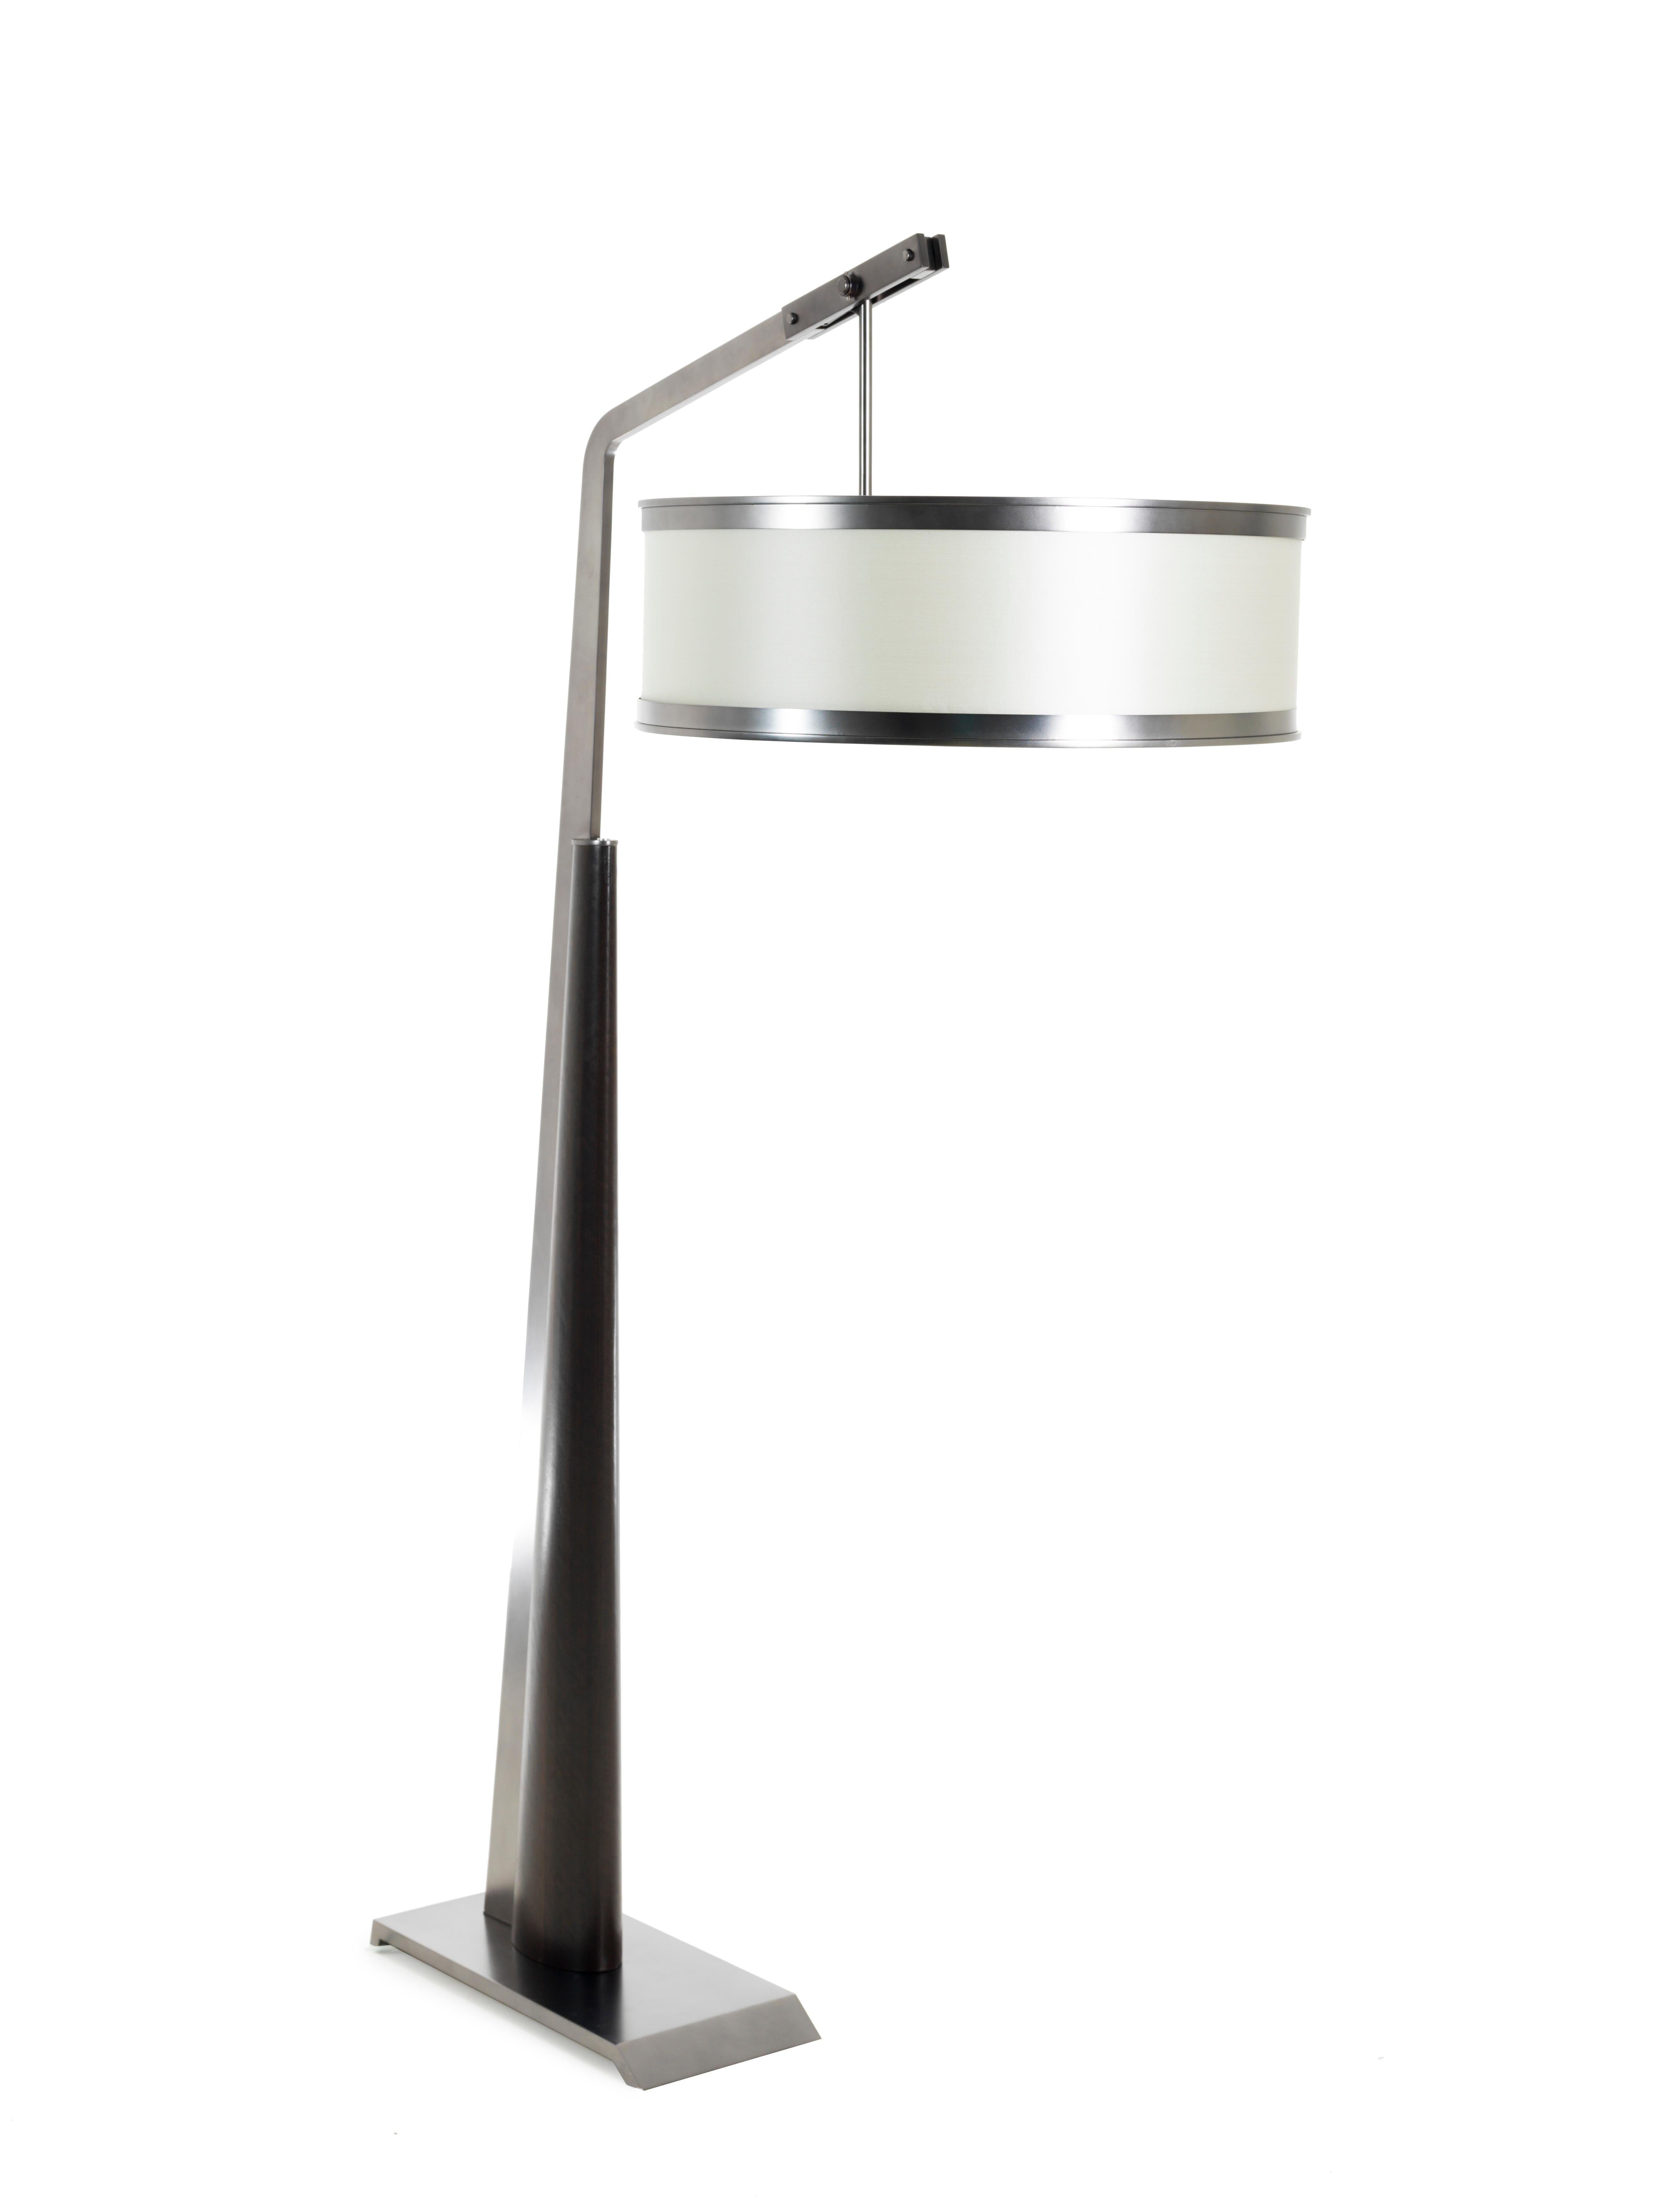 Walnut Mintaka Modern Architectural Floor Lamp with Art-Deco Vibes For Sale